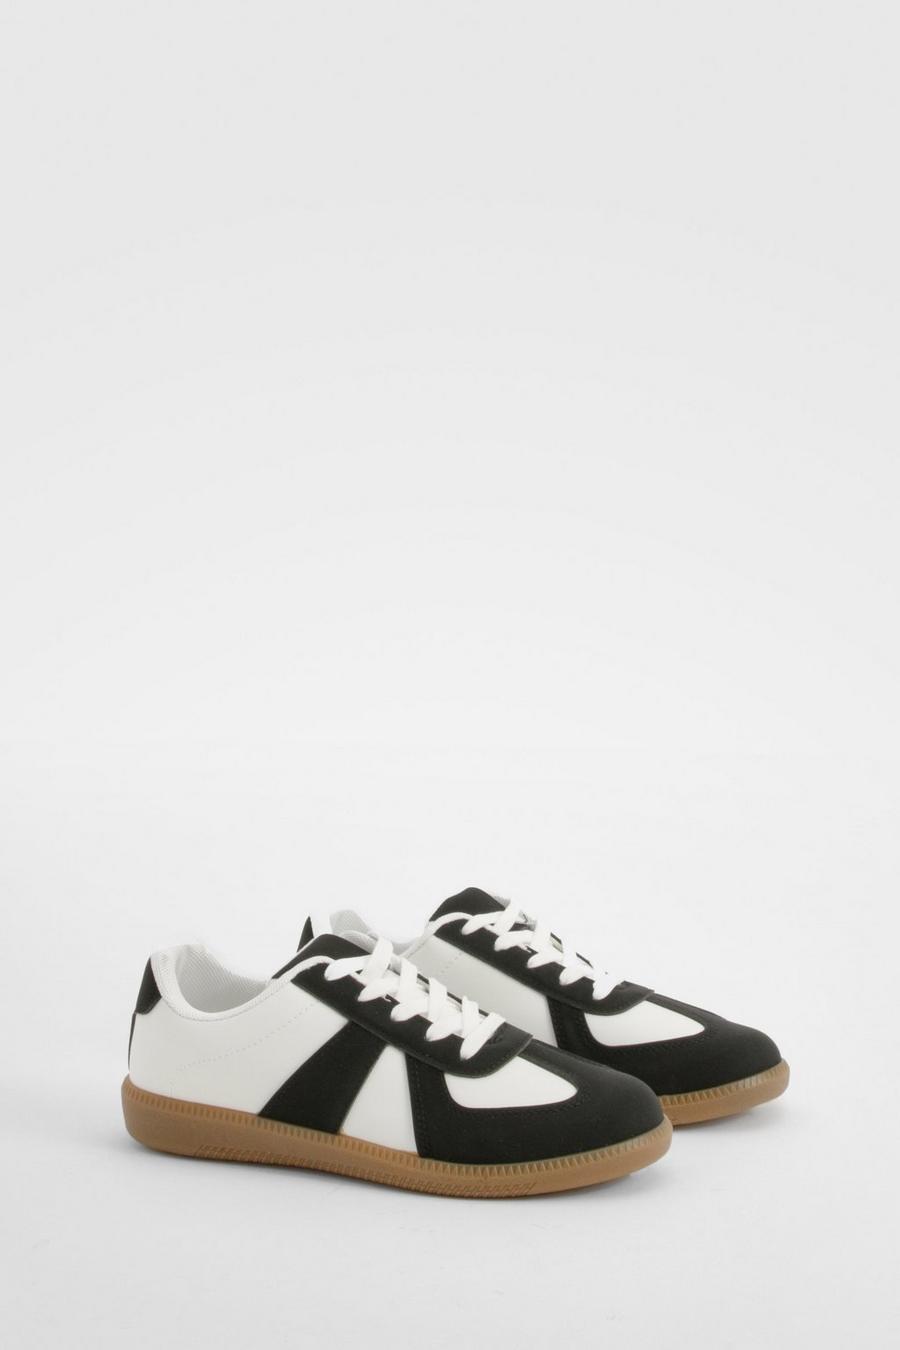 Black Contrast Panel Gum Sole Sneakers image number 1